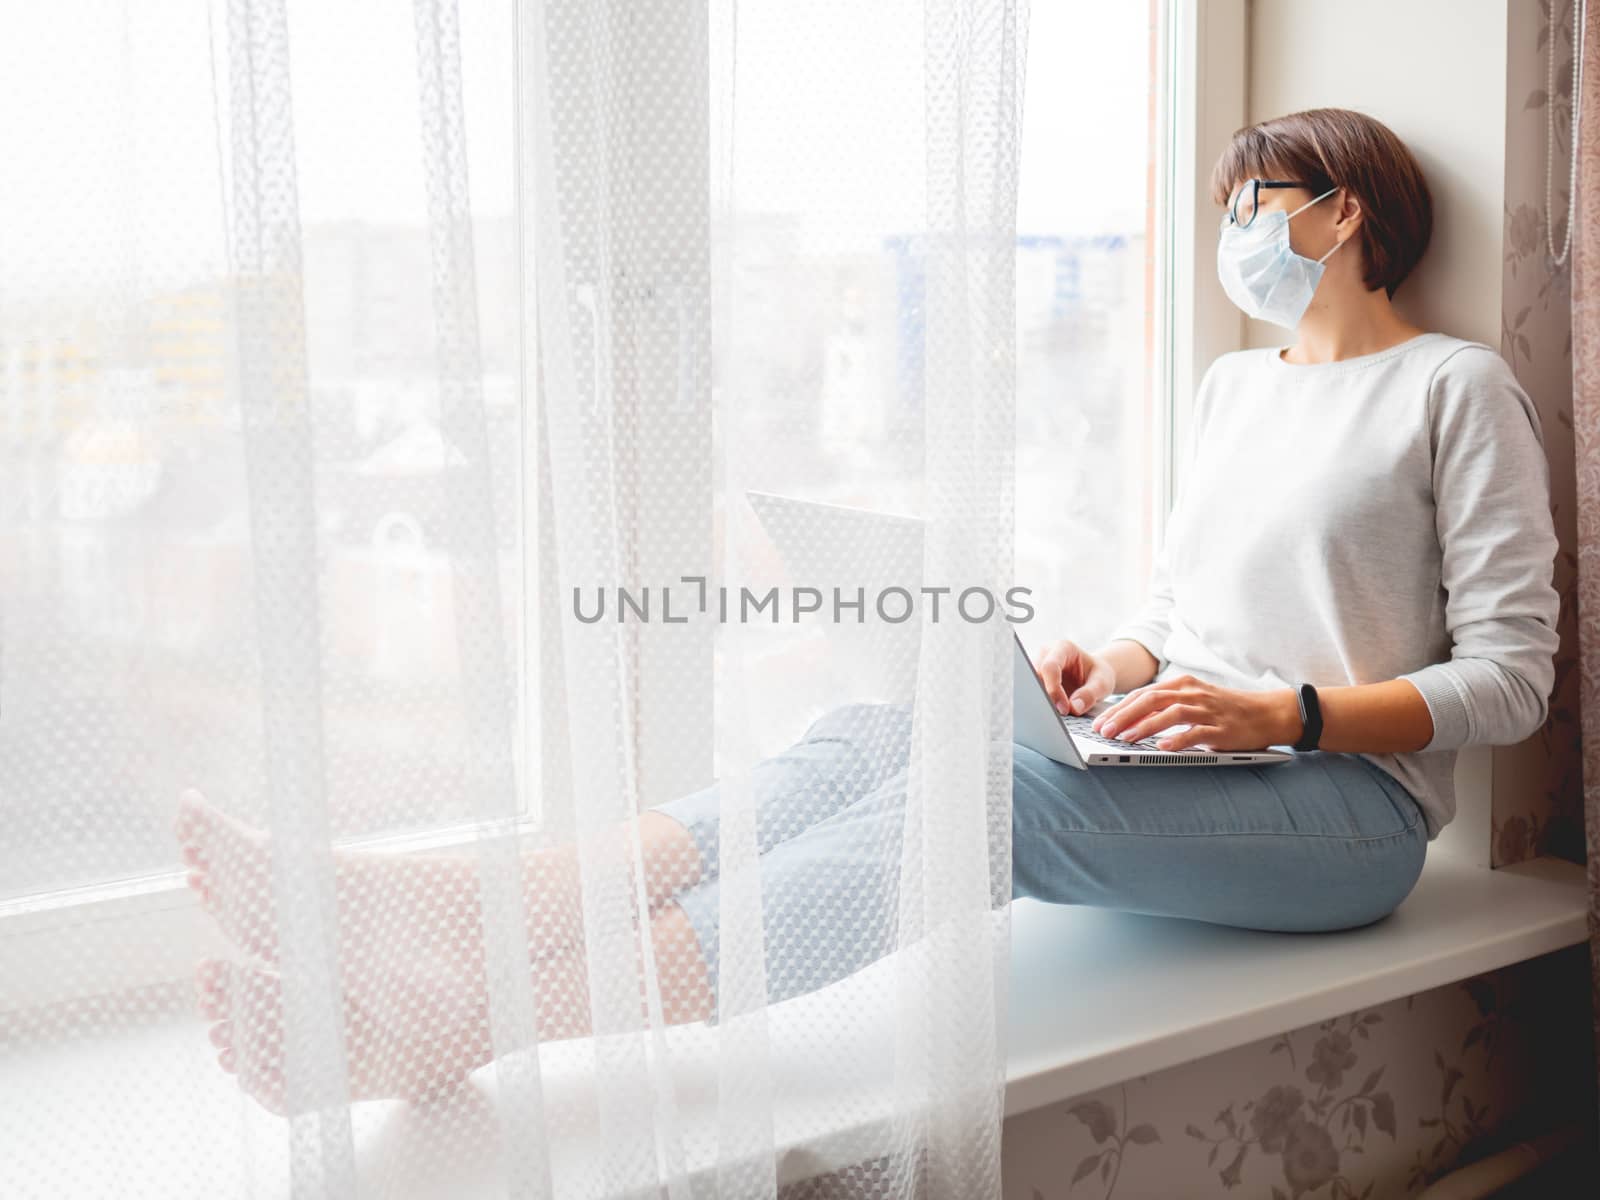 Woman in medical mask remote works from home. She sits on window by aksenovko